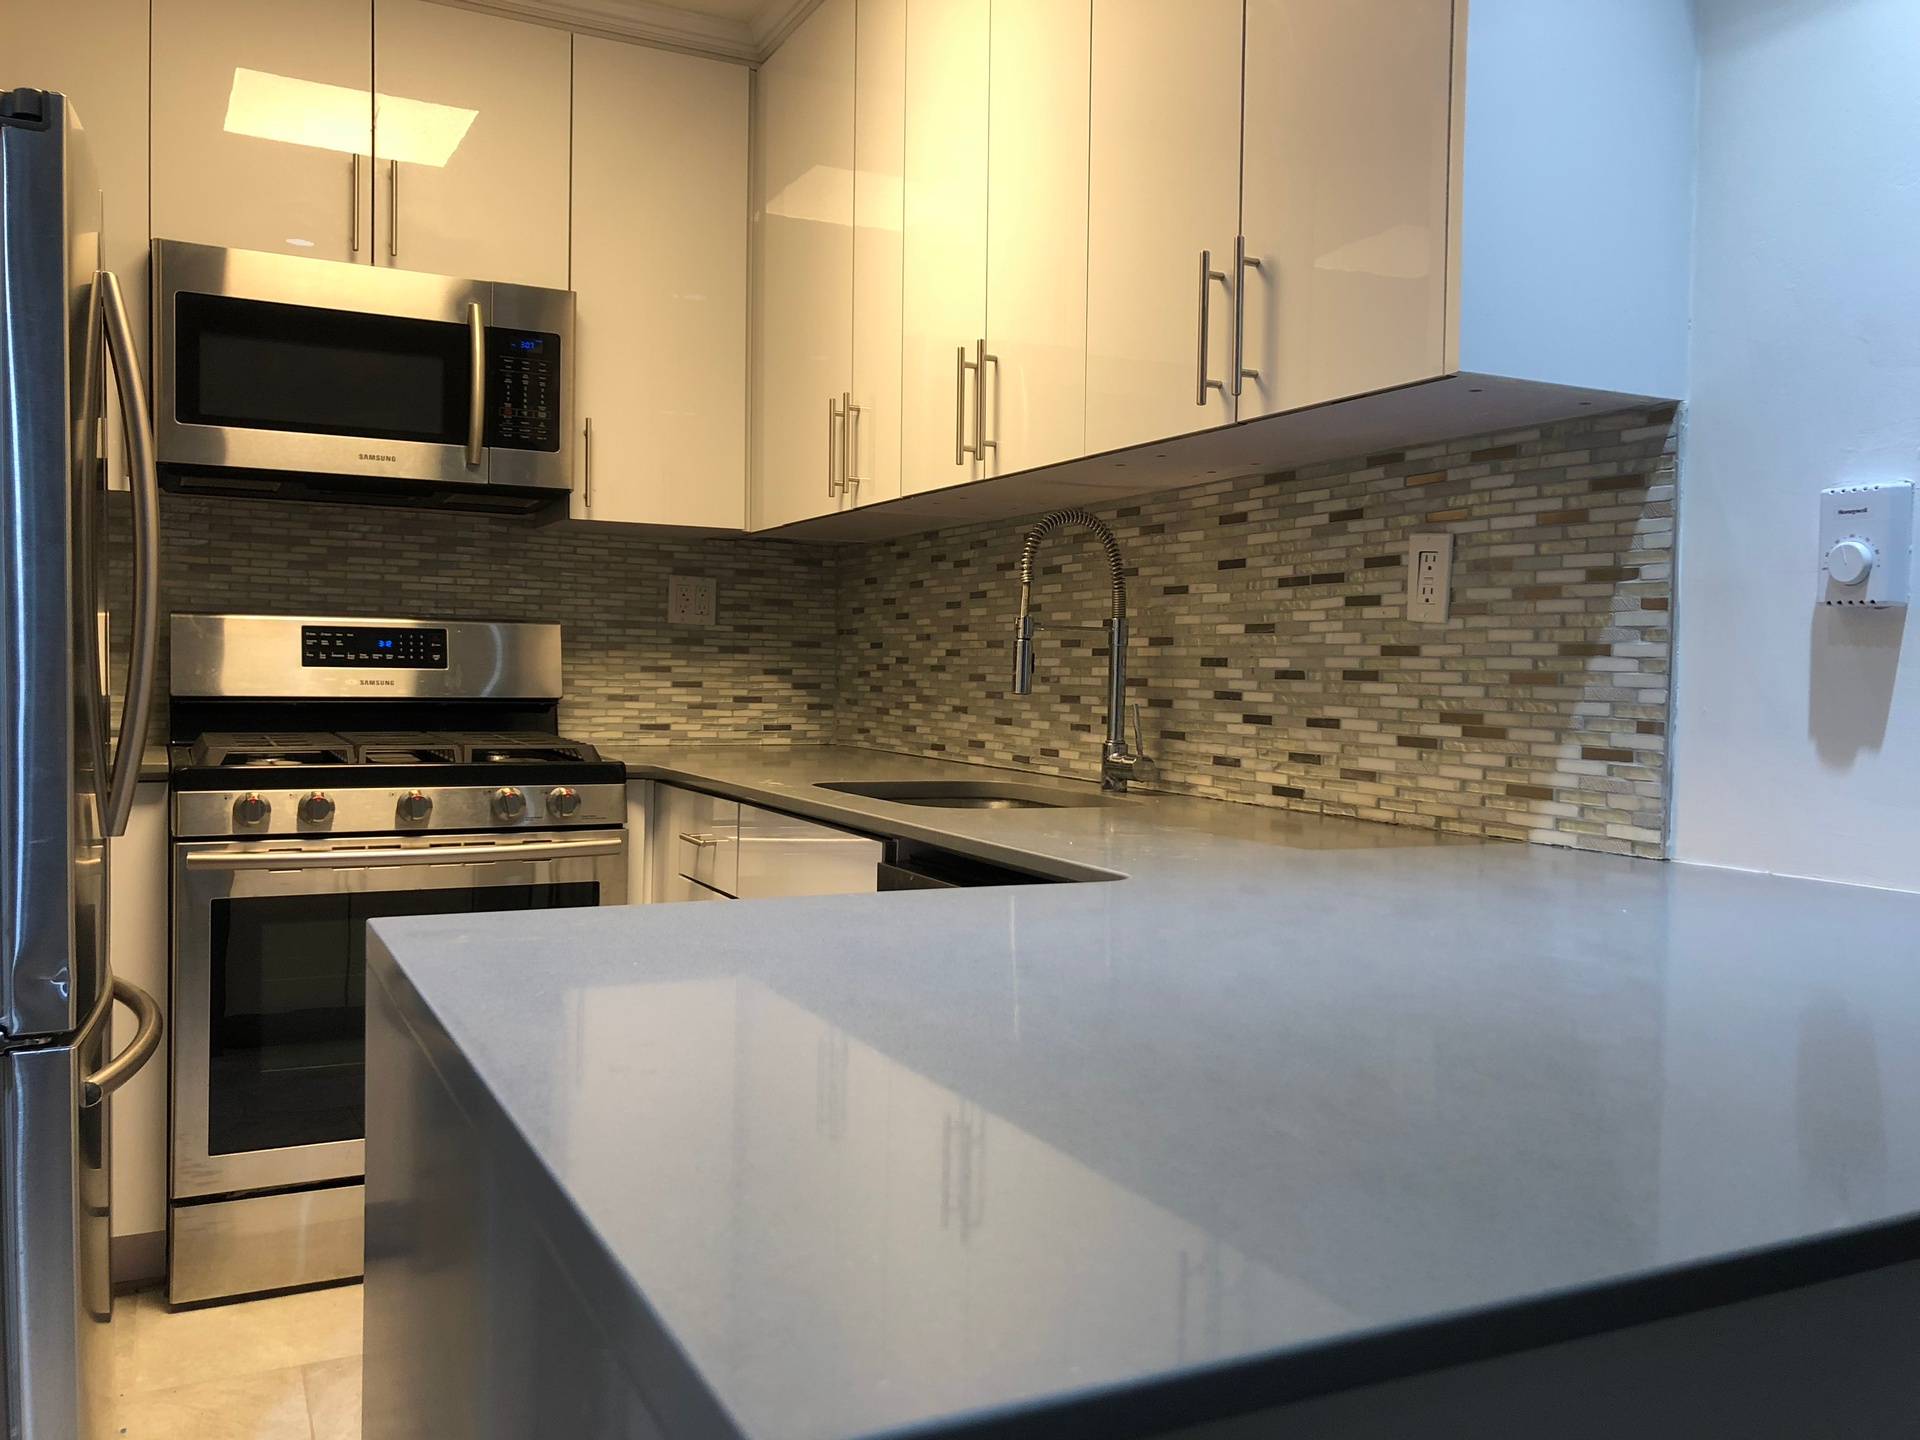 Newly Renovated Modern Style Two Bedroom One Bathroom Rental Apartment In Astoria With City Views From Balcony! Ferry and Train Access!!